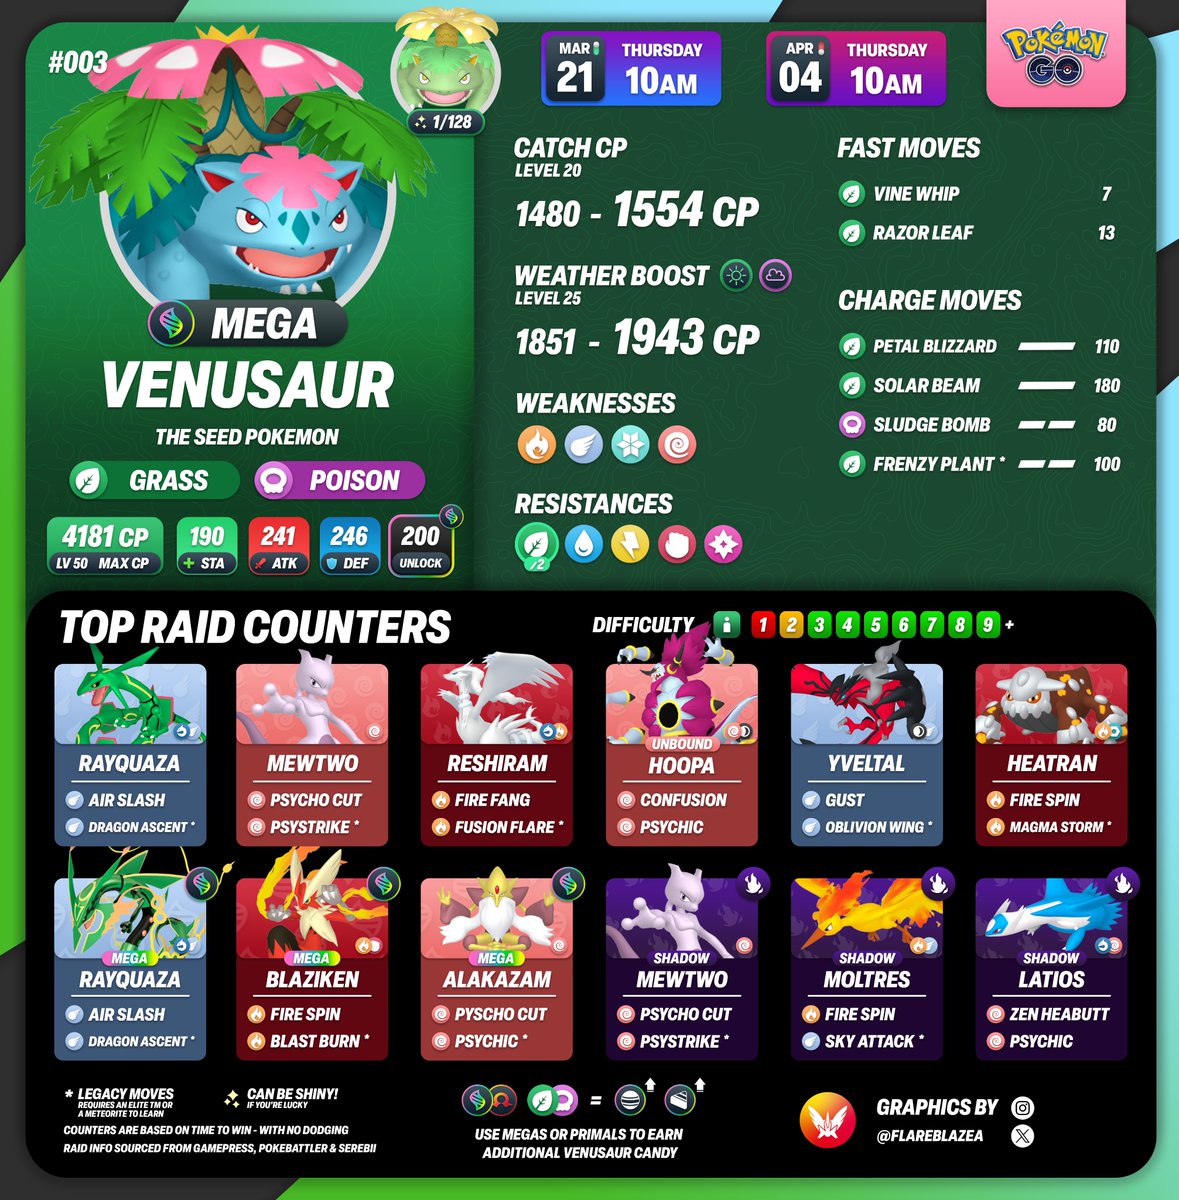 The Land Spirit Pokémon #TapuLele and #MegaVenusaur will be returning to Raids this Thursday 

🗓️ Thu 21st Mar at 10am - Thu 4th Apr at 10am Local 
🧚 Tapu Lele caught will know Nature's Madness 
✨ And, of course, both Pokémon CAN be Shiny! 

#PokemonGO #PokemonGORaids